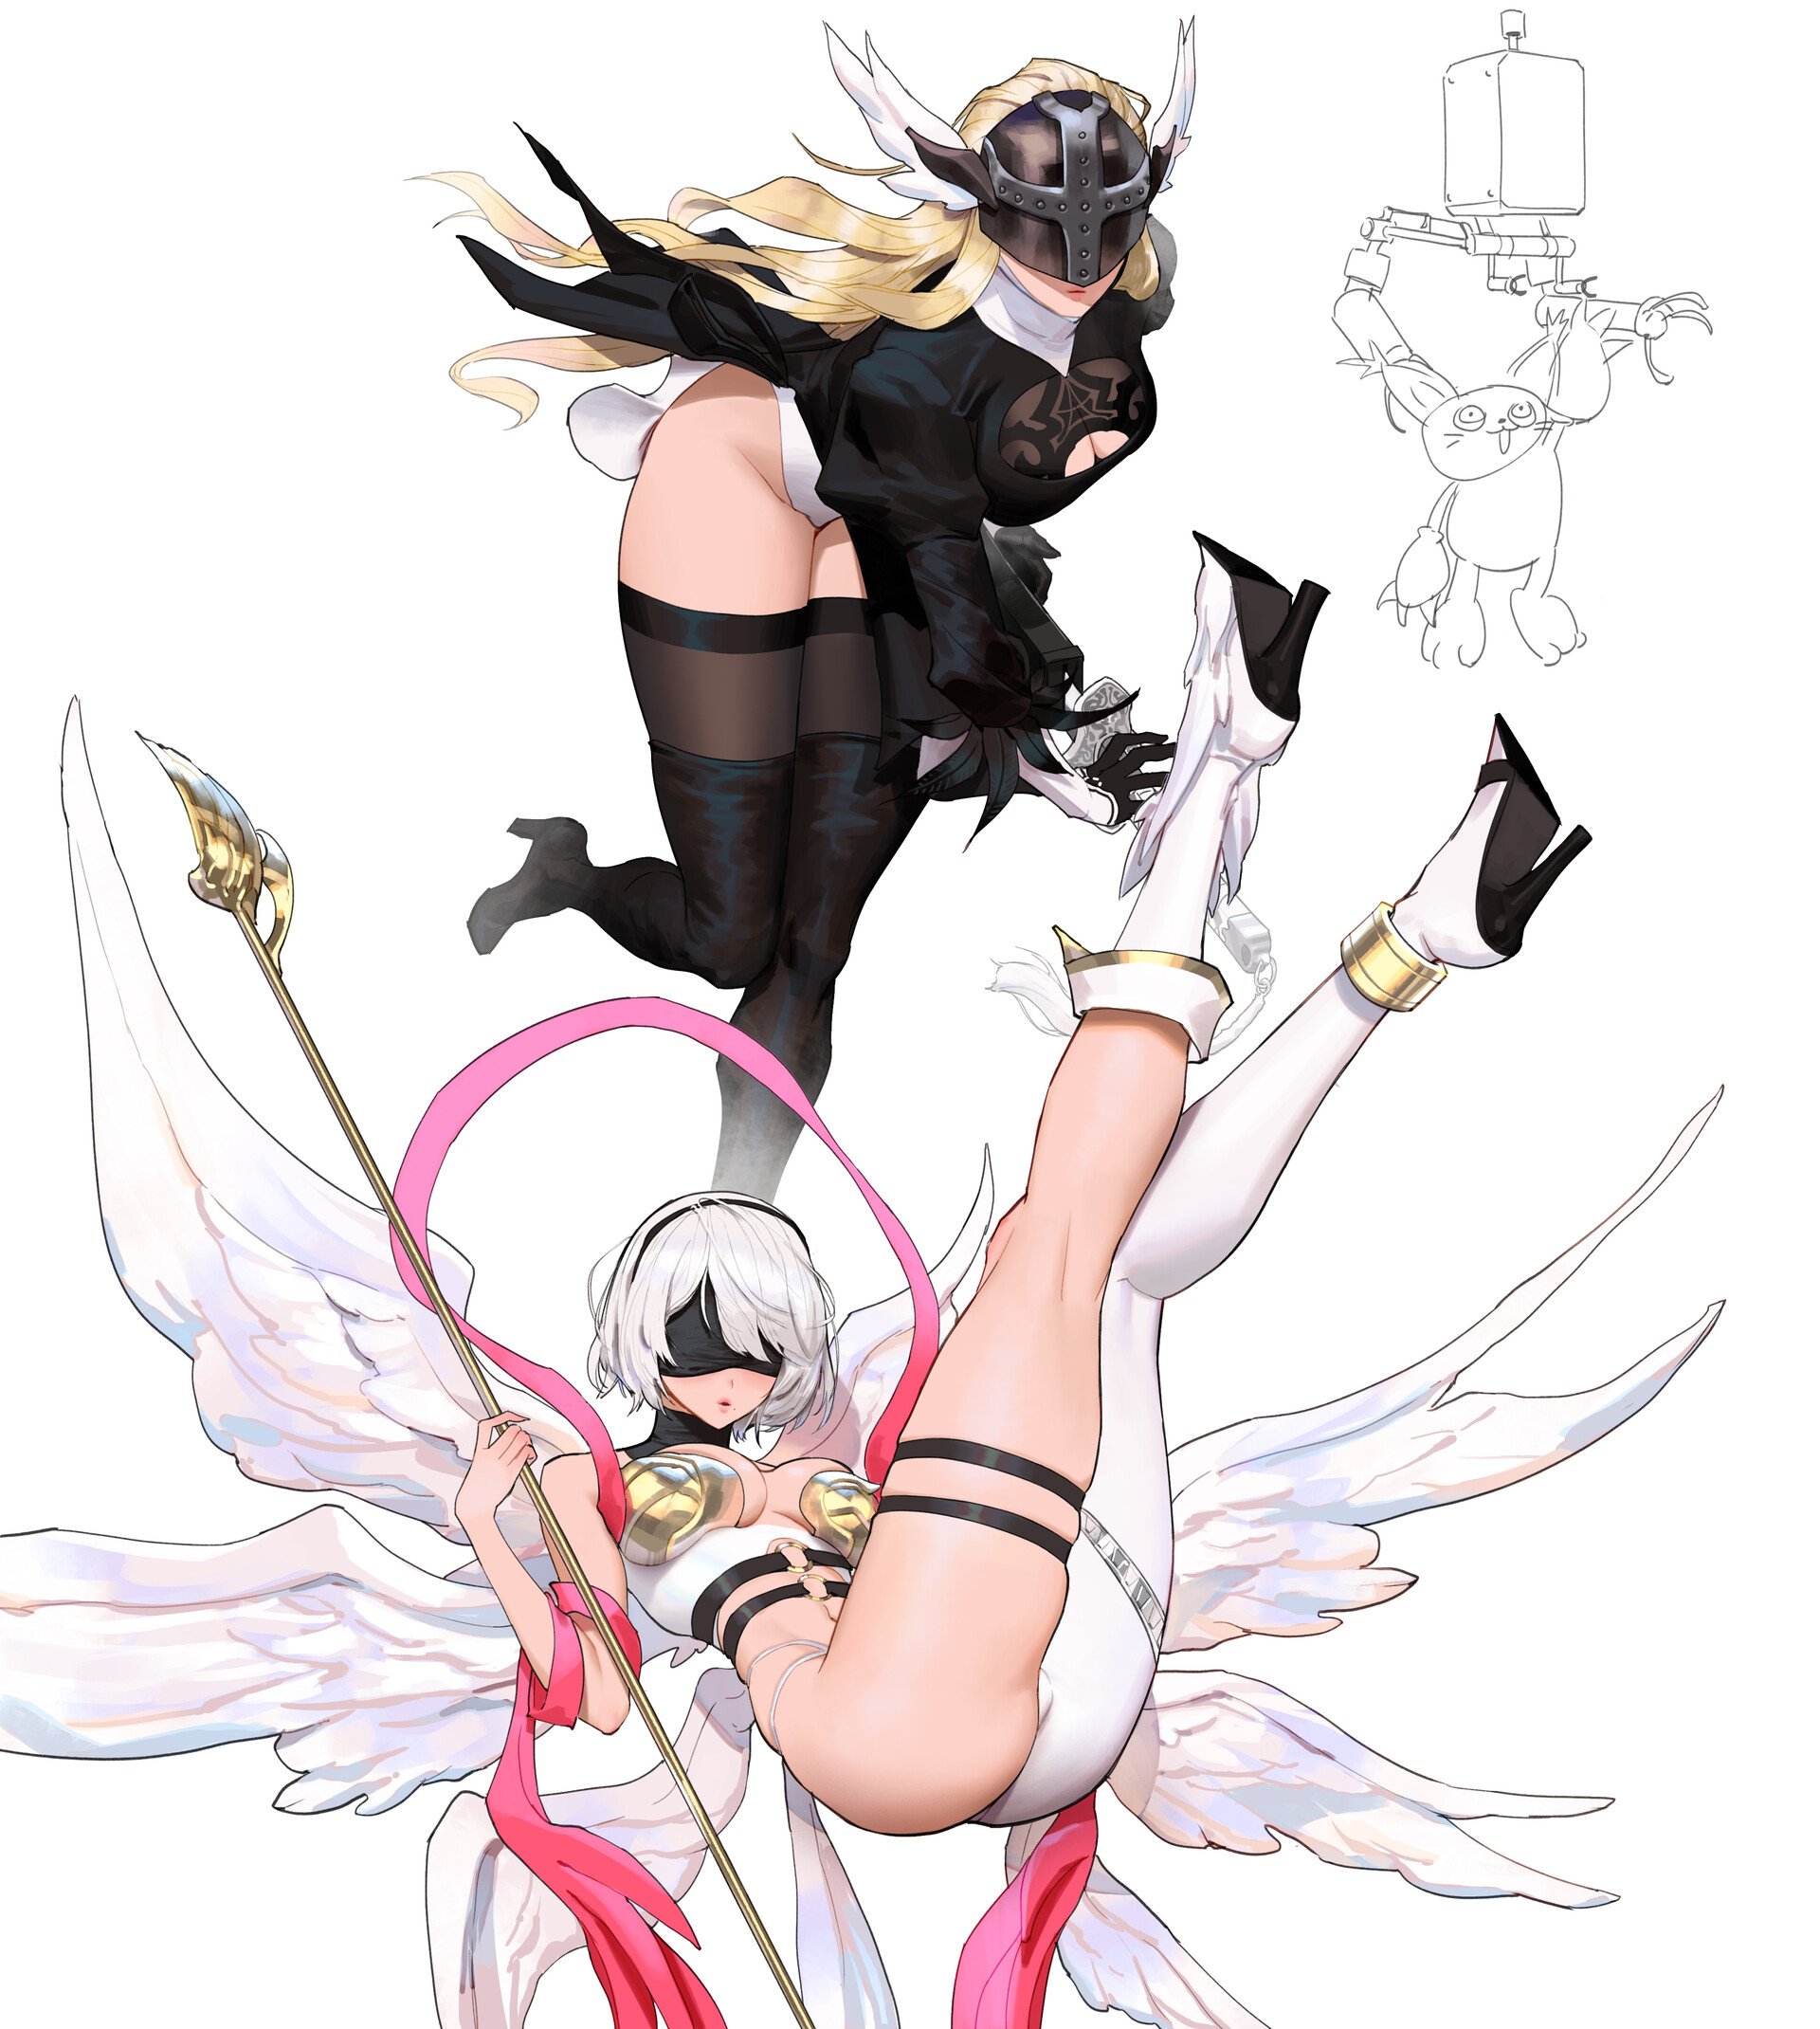 General 1920x2140 portrait display Digimon crossover thigh strap heels simple background thighs ass legs short hair long hair white background mask angewomon minimalism 2B (Nier: Automata) wings Wonbin Lee digital art blindfold drawing women two women shoe sole